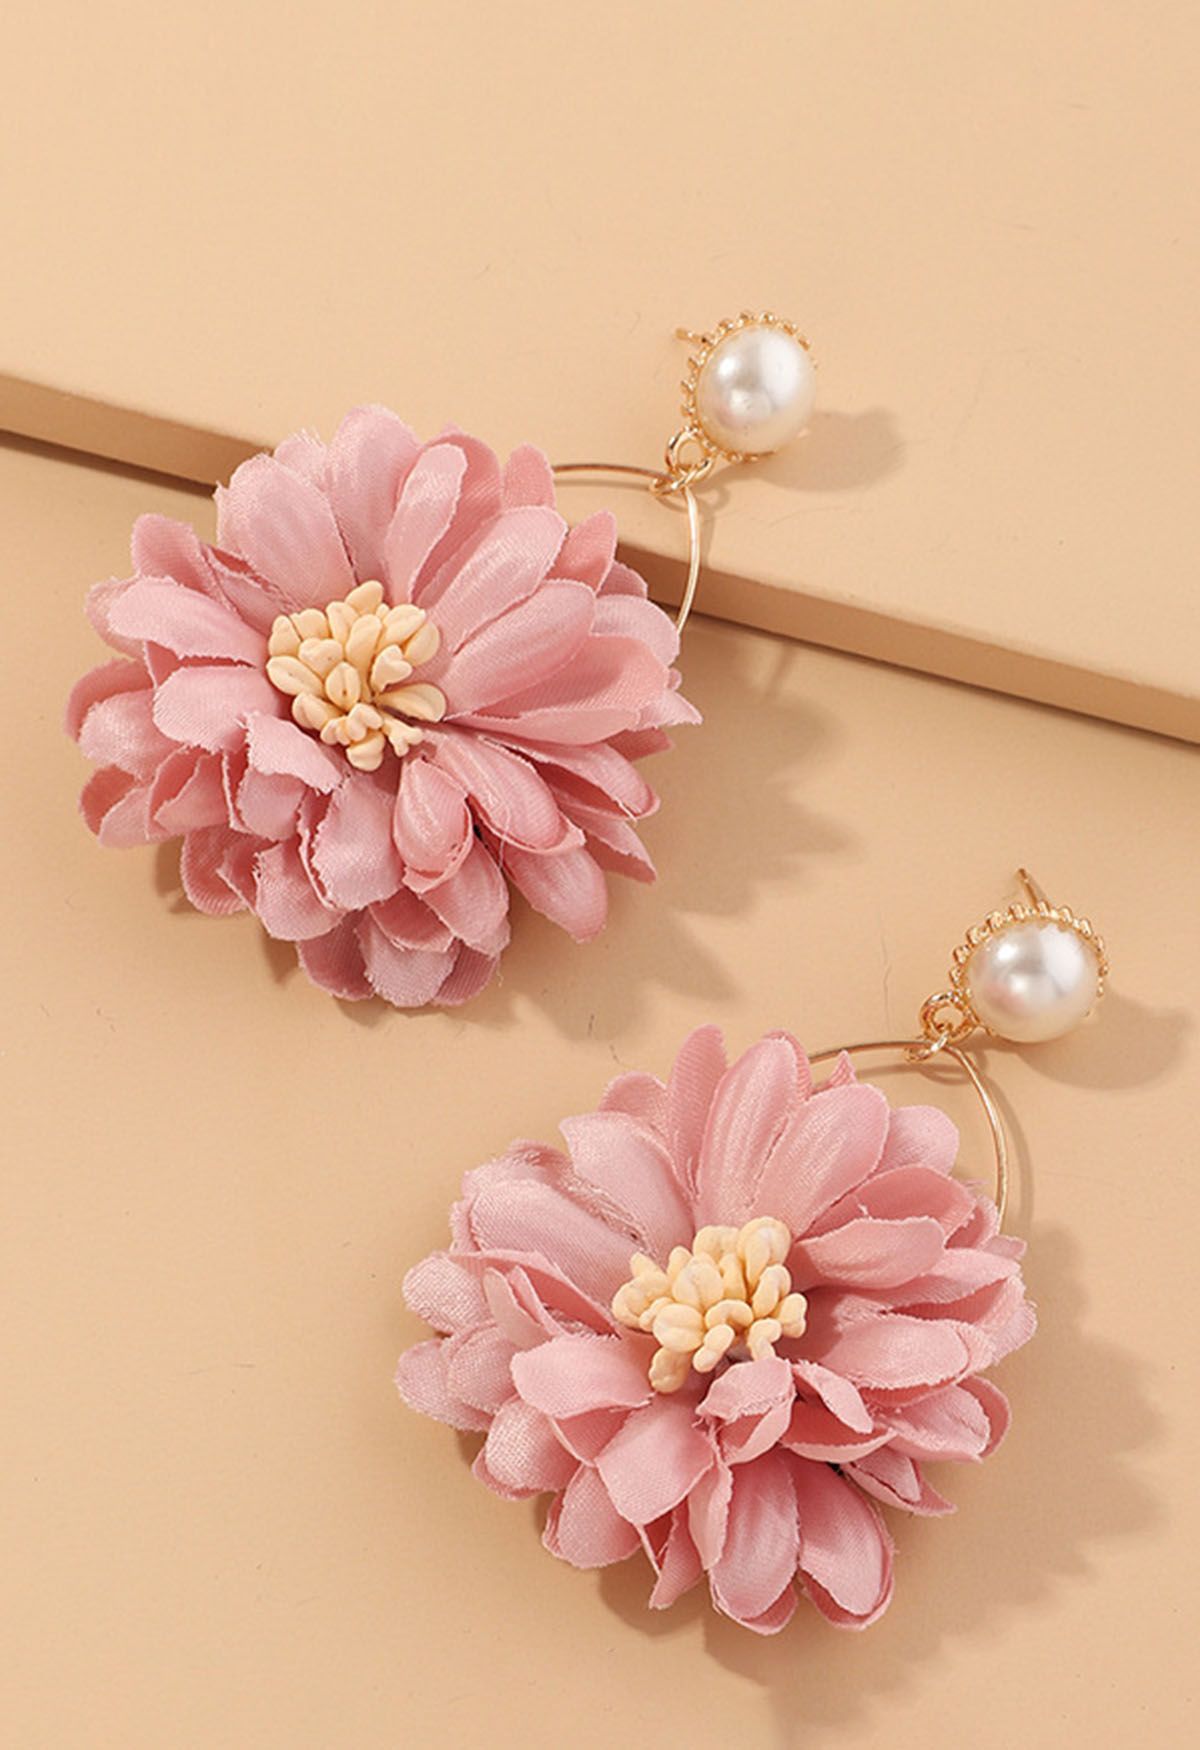 Captivating Blossom Pearl Earrings in Pink